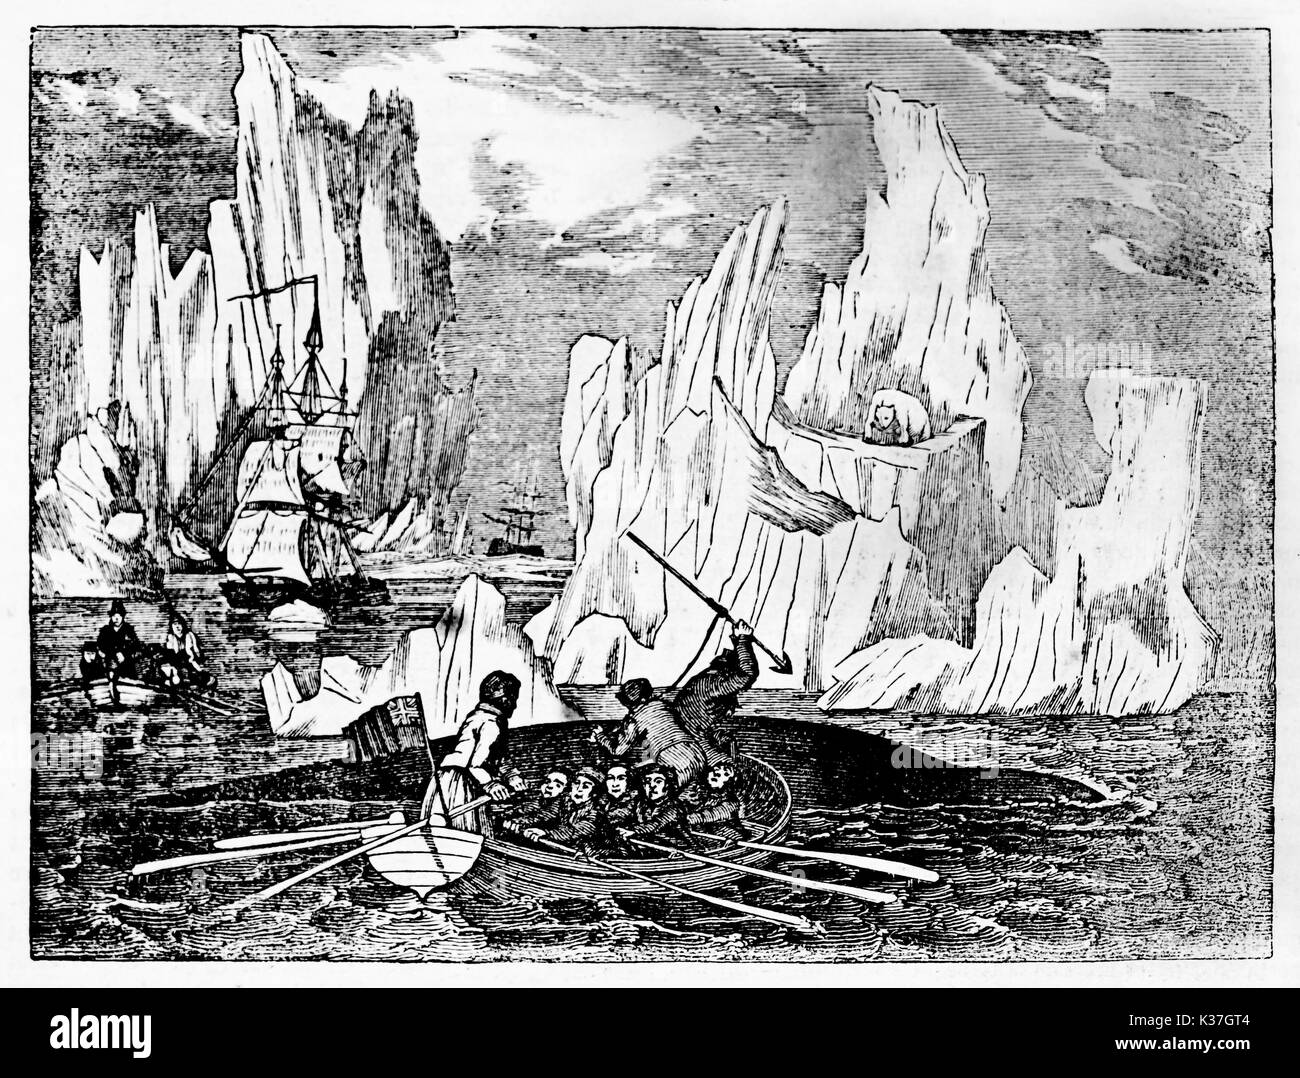 Ancient rough illustration of a boat whaling in the cold North Sea with icebergs on background. Old Illustration by unidentified author published on Magasin Pittoresque Paris 1834 Stock Photo